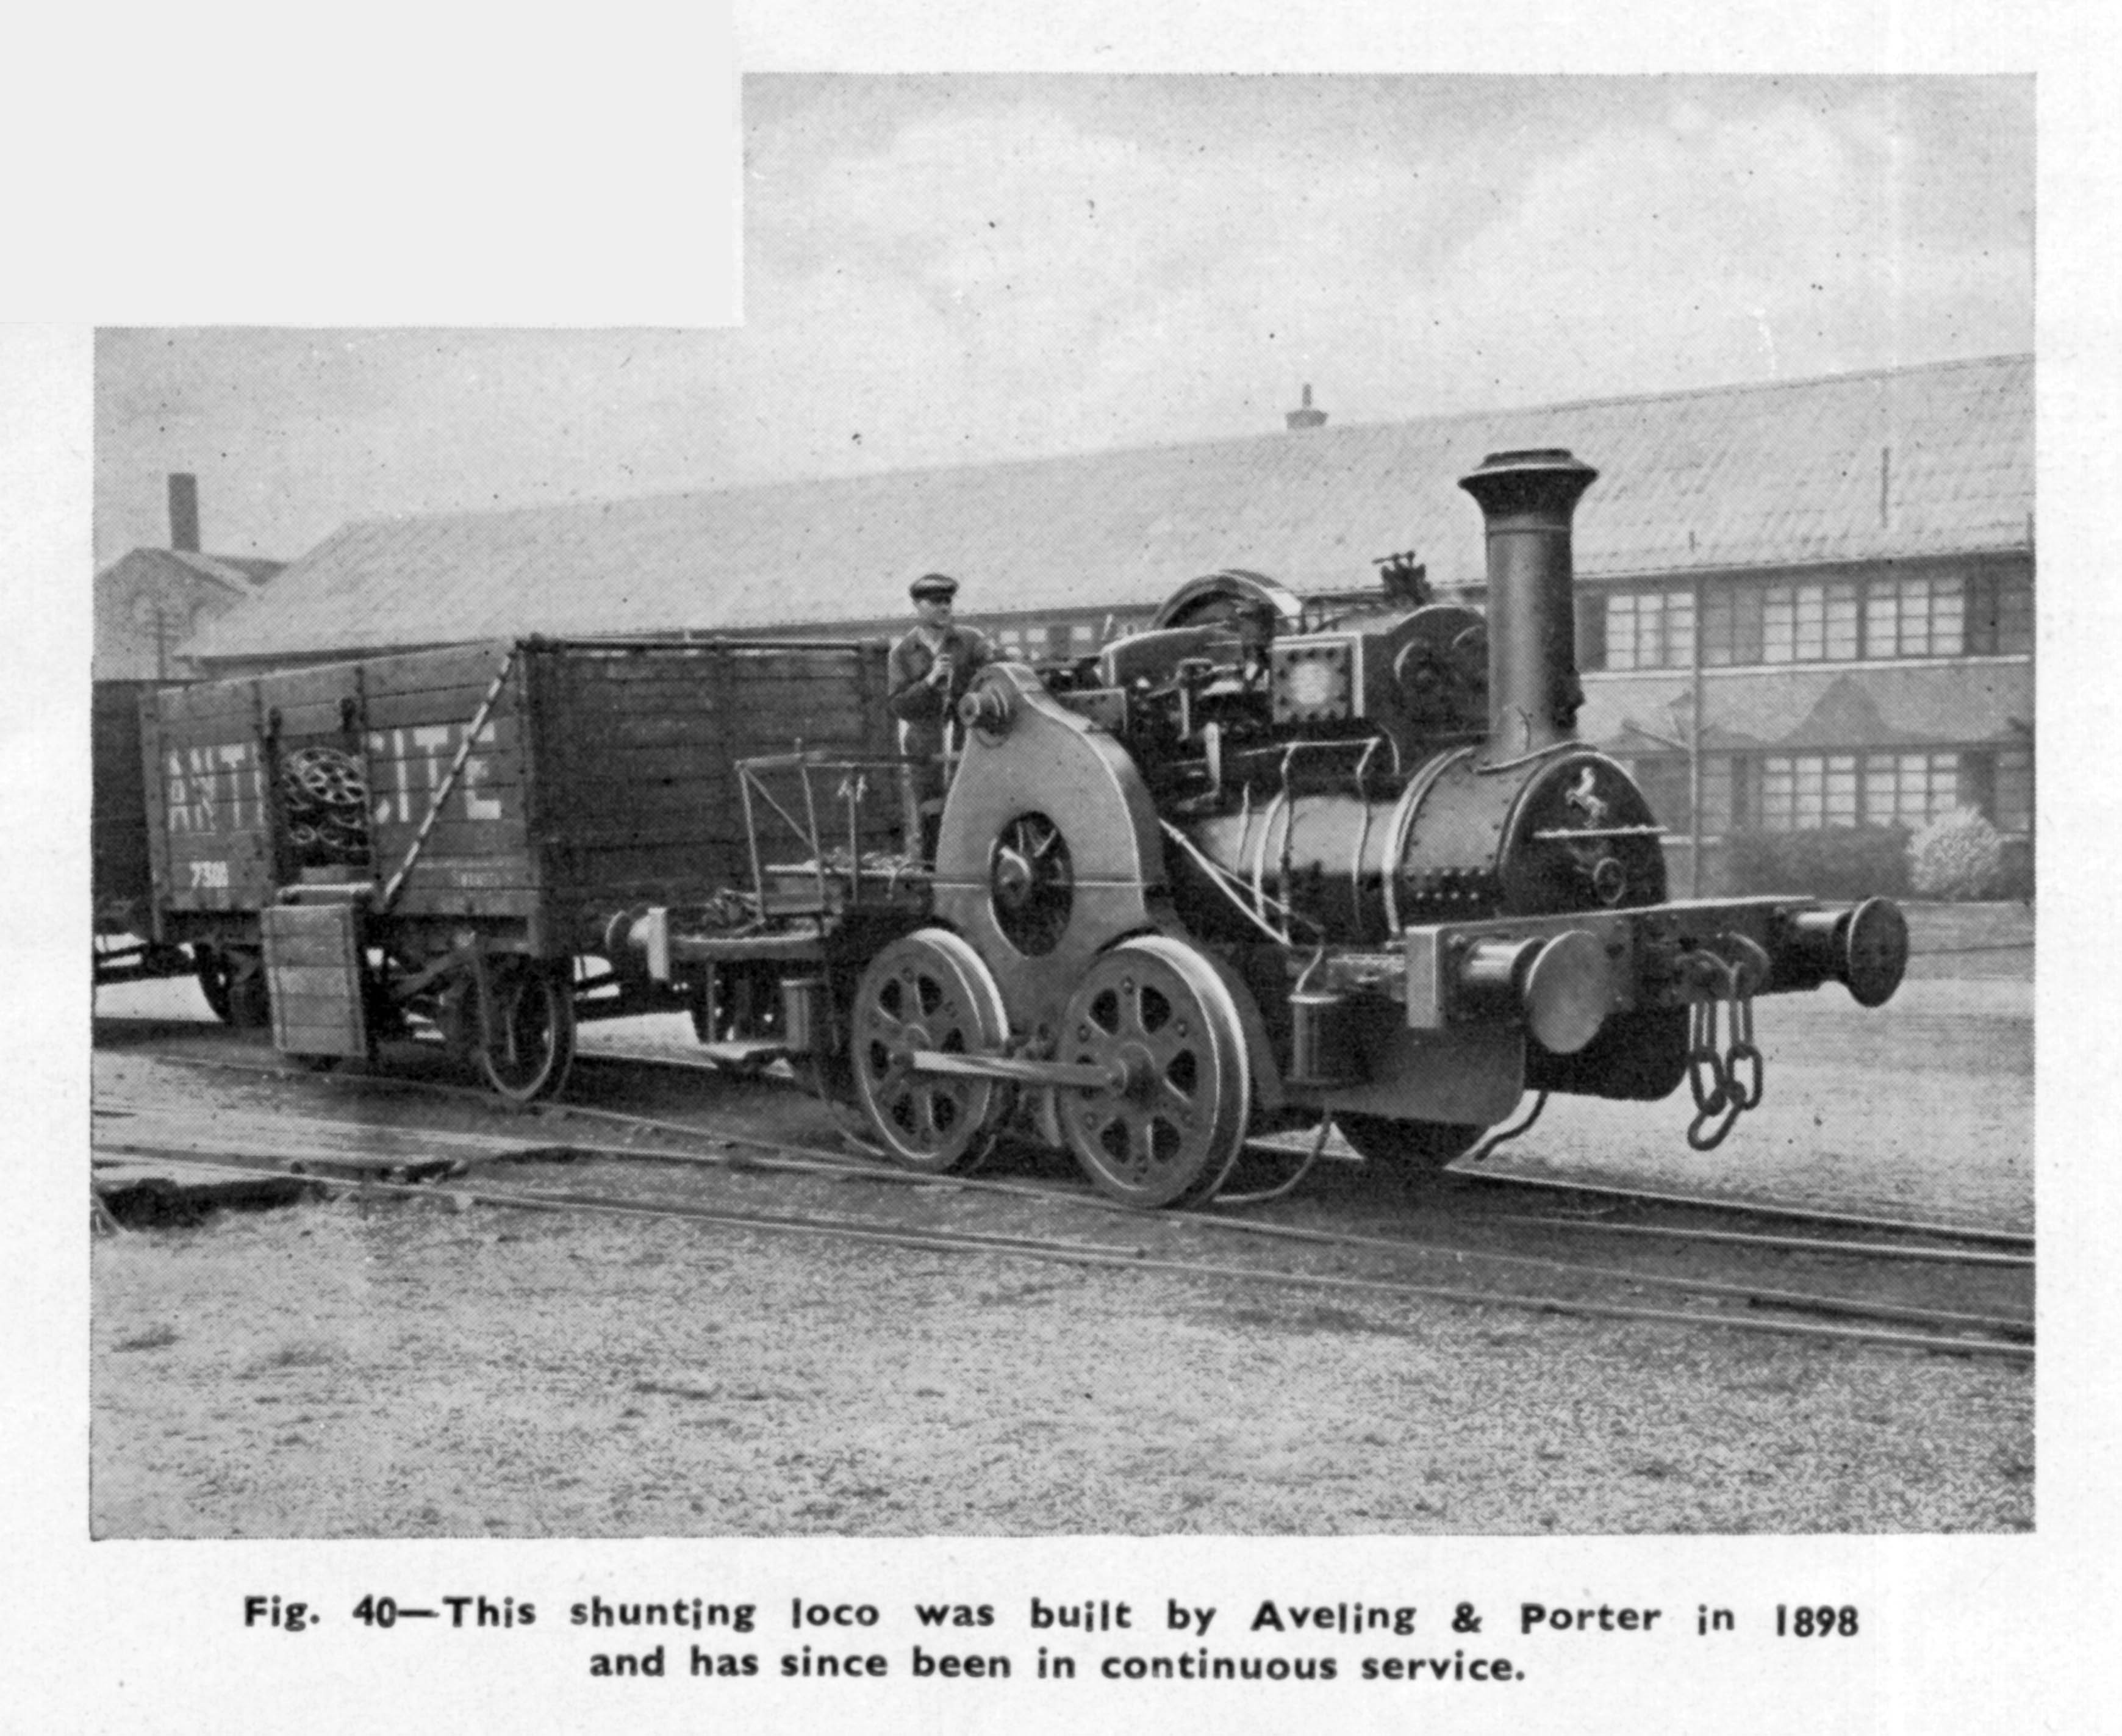 The Aveling-Barford 'tramway' shunting locomotive in the works sidings at Grantham. The wheels were powered by a gear drive, shielded by the cover just in front of the driver. While this engine may appear insignificant beside the express and main line locomotives of the adjacent LNER it had an advanced technical feature which few of them shared. It was a 'compound' engine having separate high pressure and low pressure cylinders, seen mounted above the boiler just behind the rather elaborate chimney. The only compound engine seen on the main line at Grantham at this time was the unique Class W1 locomotive No. 10000. From page 11 of a booklet The Works and Products of Aveling-Barford Ltd. Grantham reprinted from British Machine Tool Engineering, July-August-September 1942 issue. Discovery Museum Newcastle ref SE 7558.